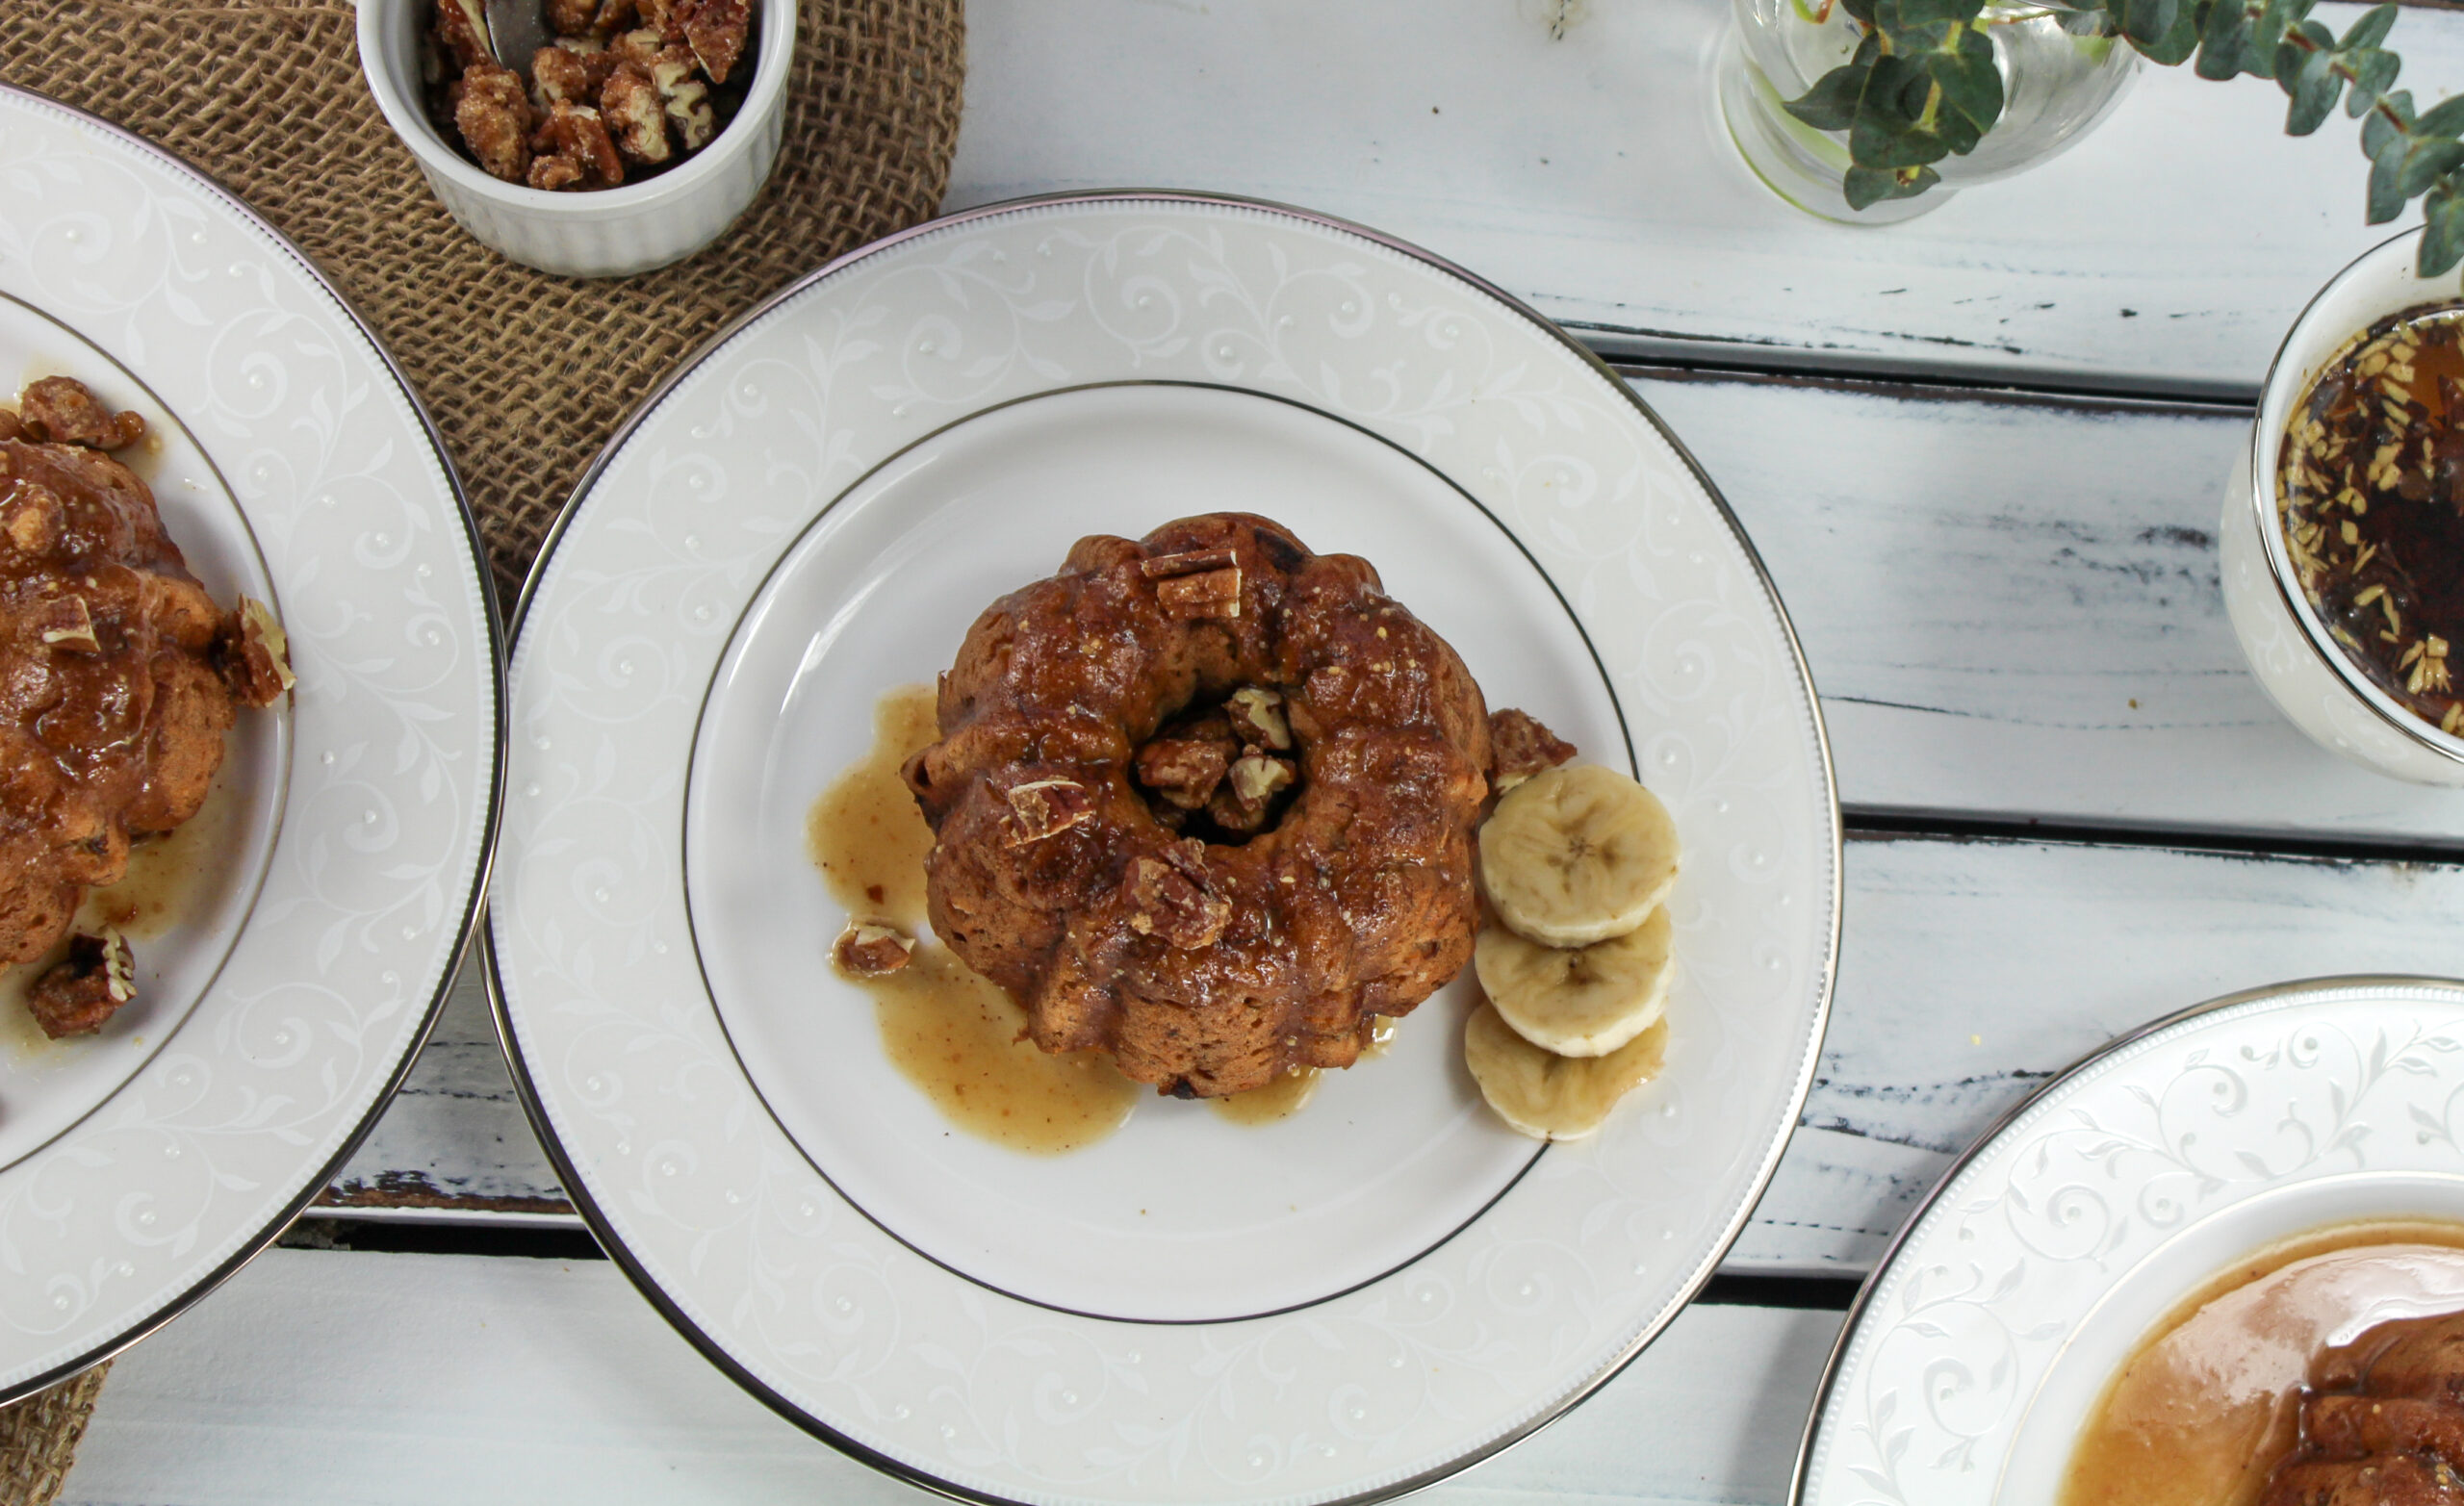 Mini Banana Bundt Cakes with Coffee Salted Caramel - Cloudy Kitchen